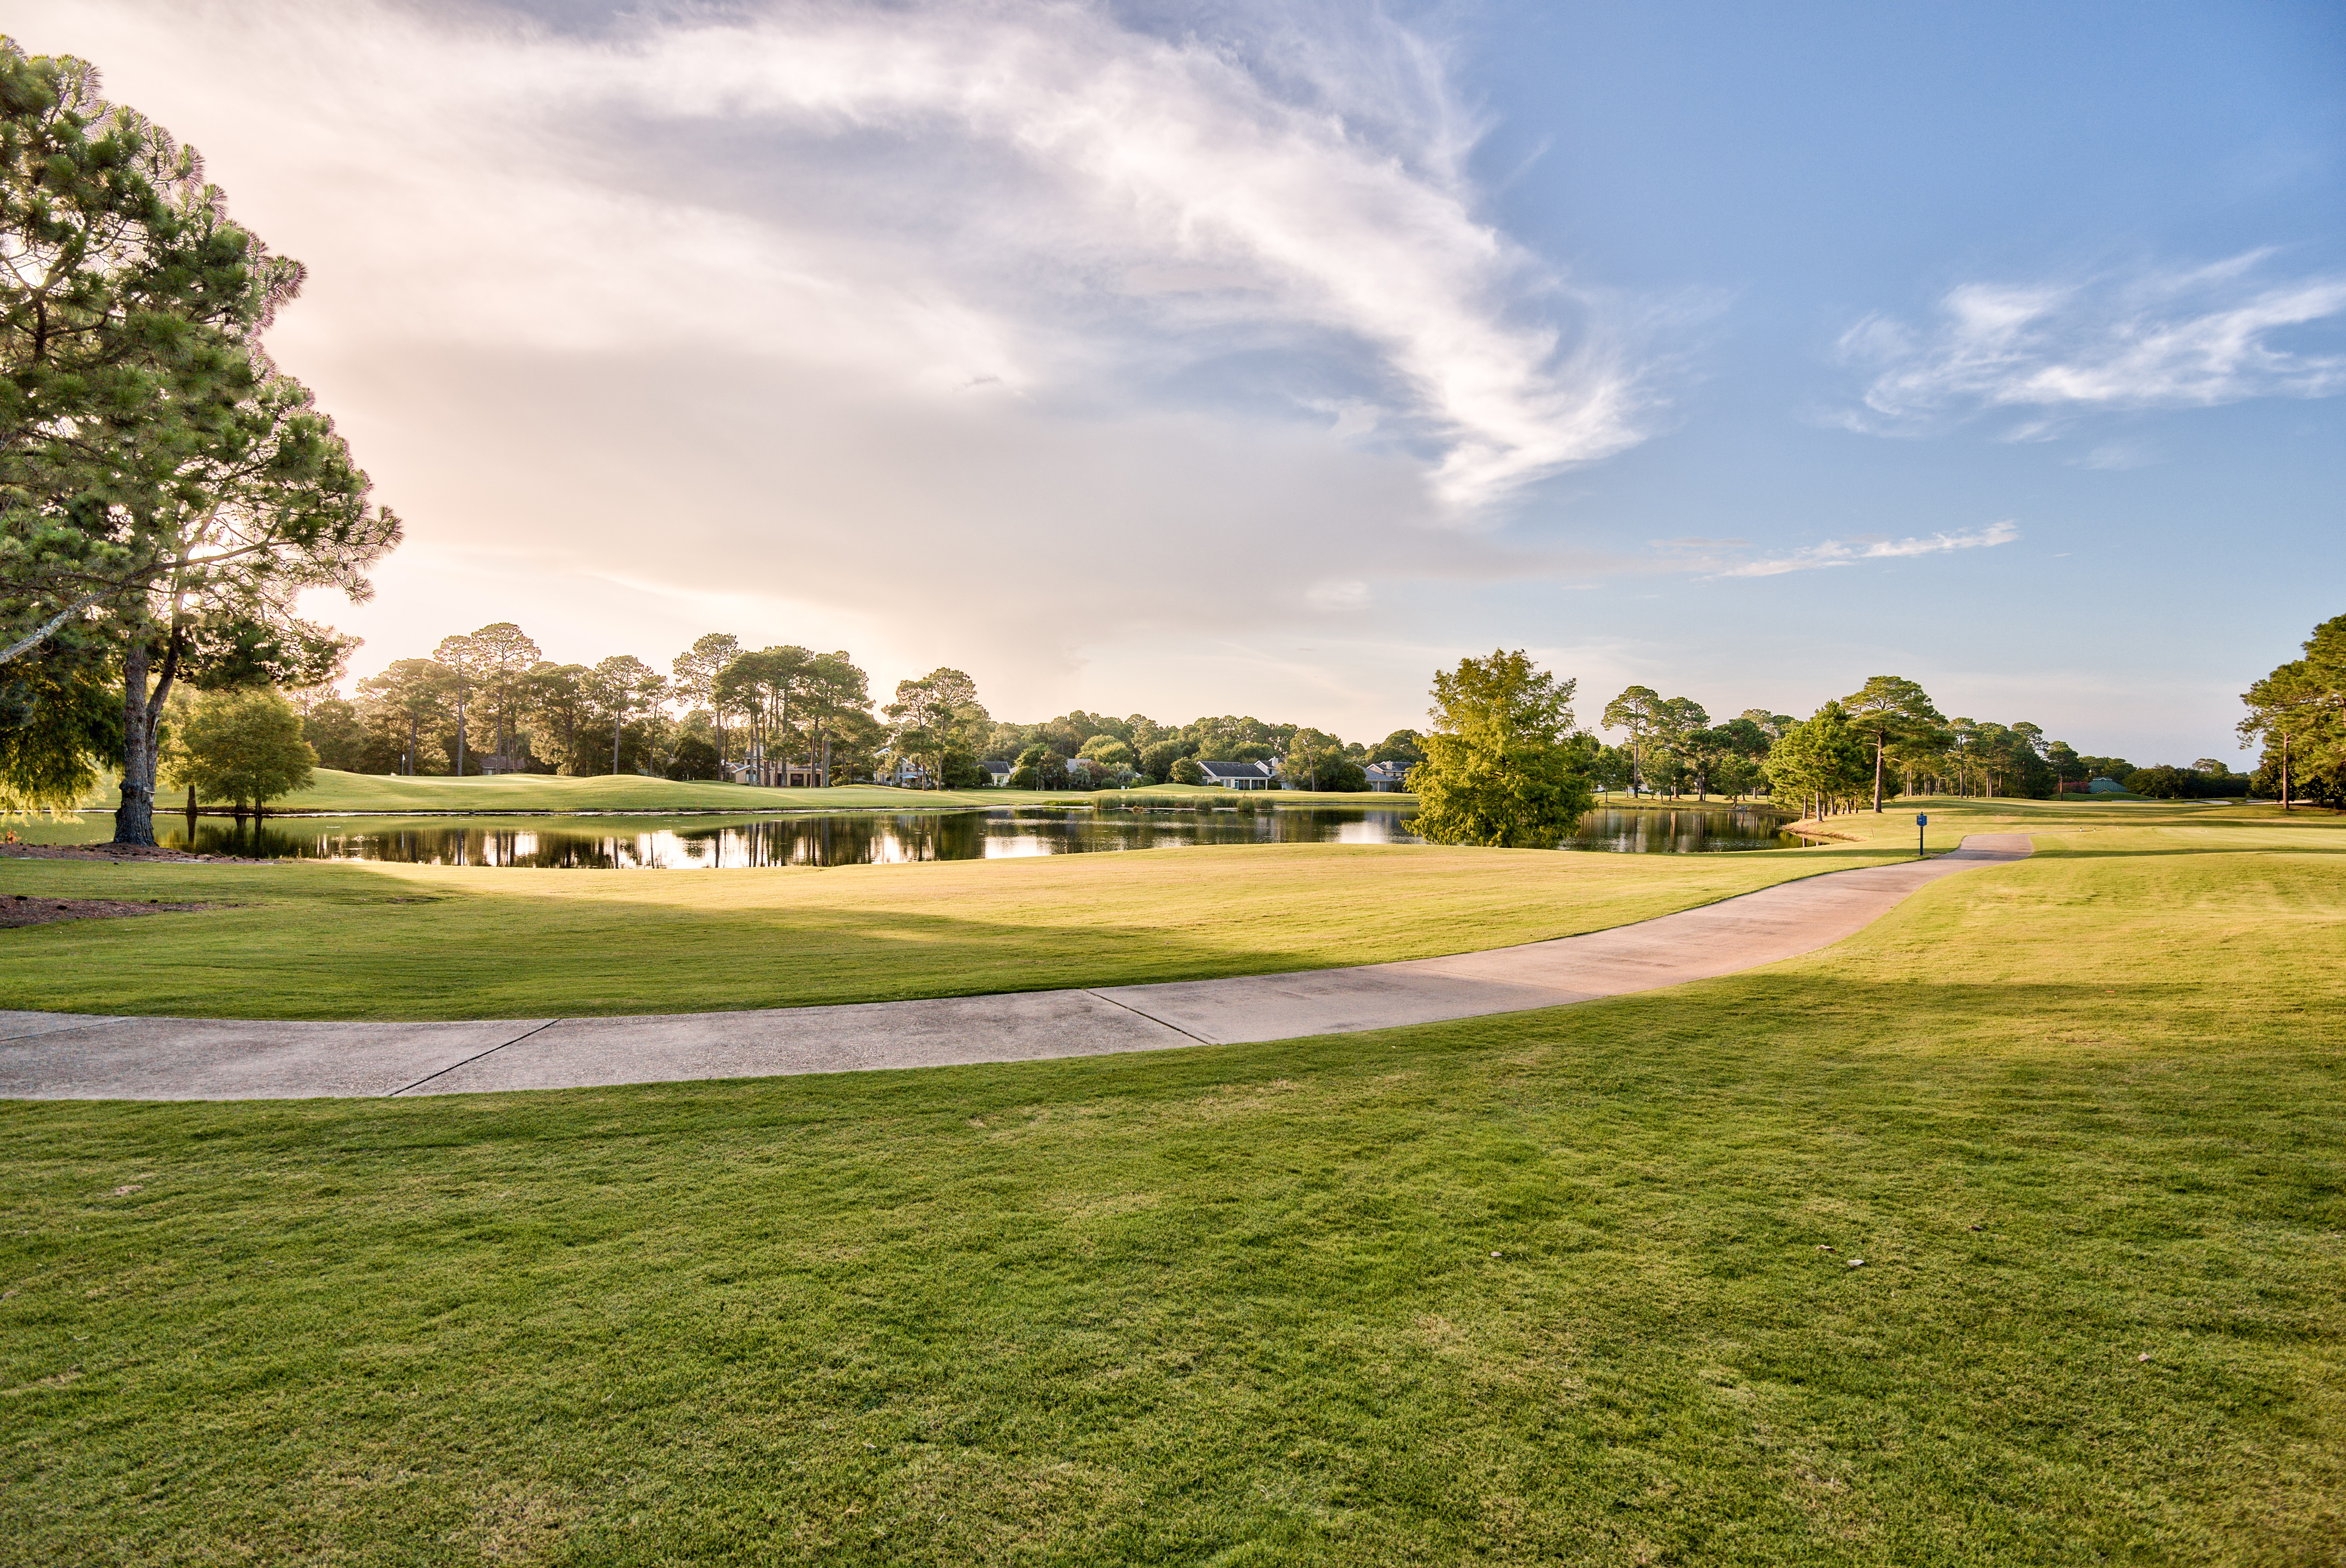 A view of the Sandestin golf course near sunset